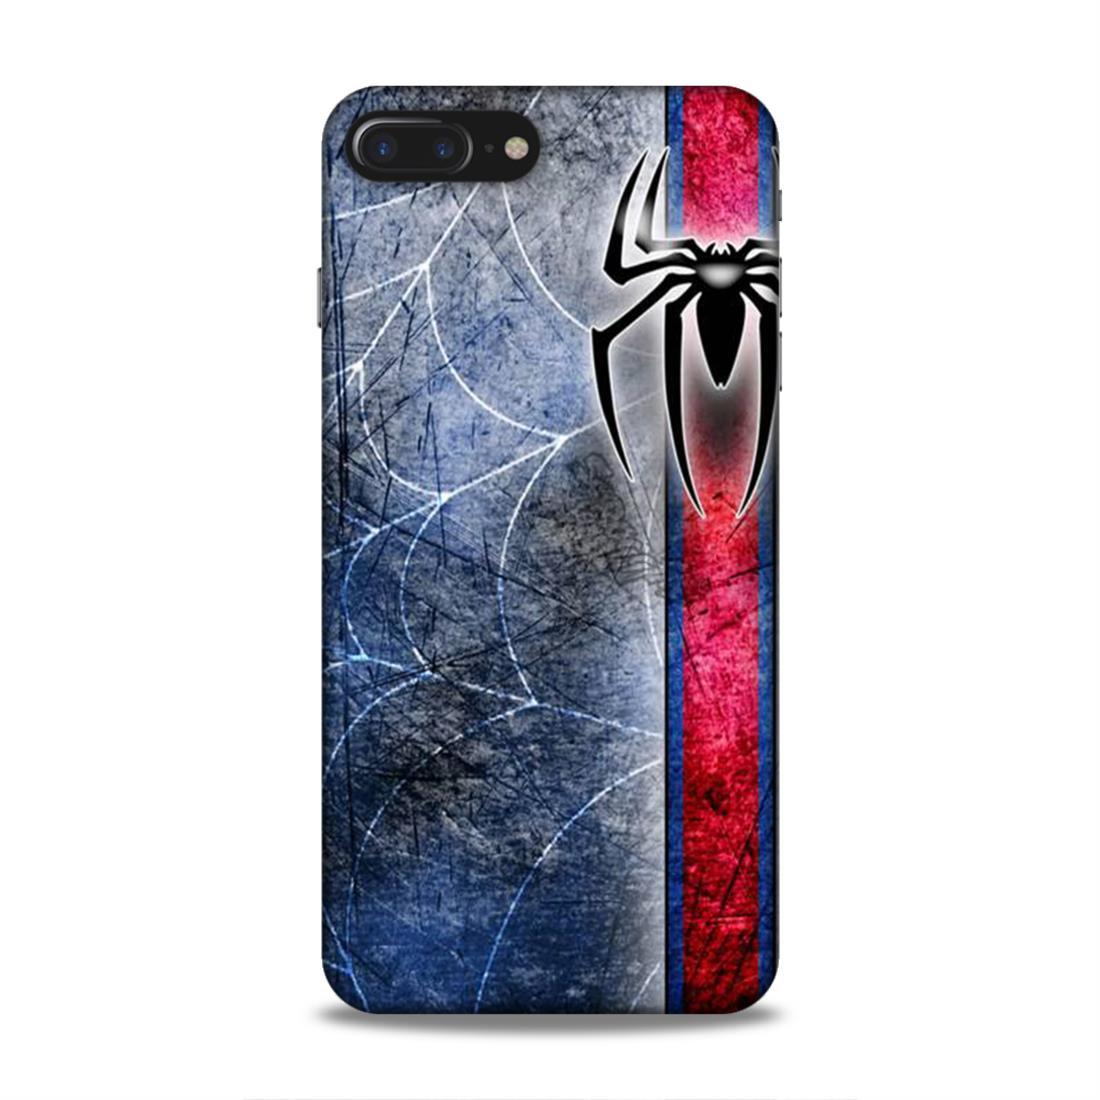 Spider Pattern iPhone 8 Plus Phone Back Cover